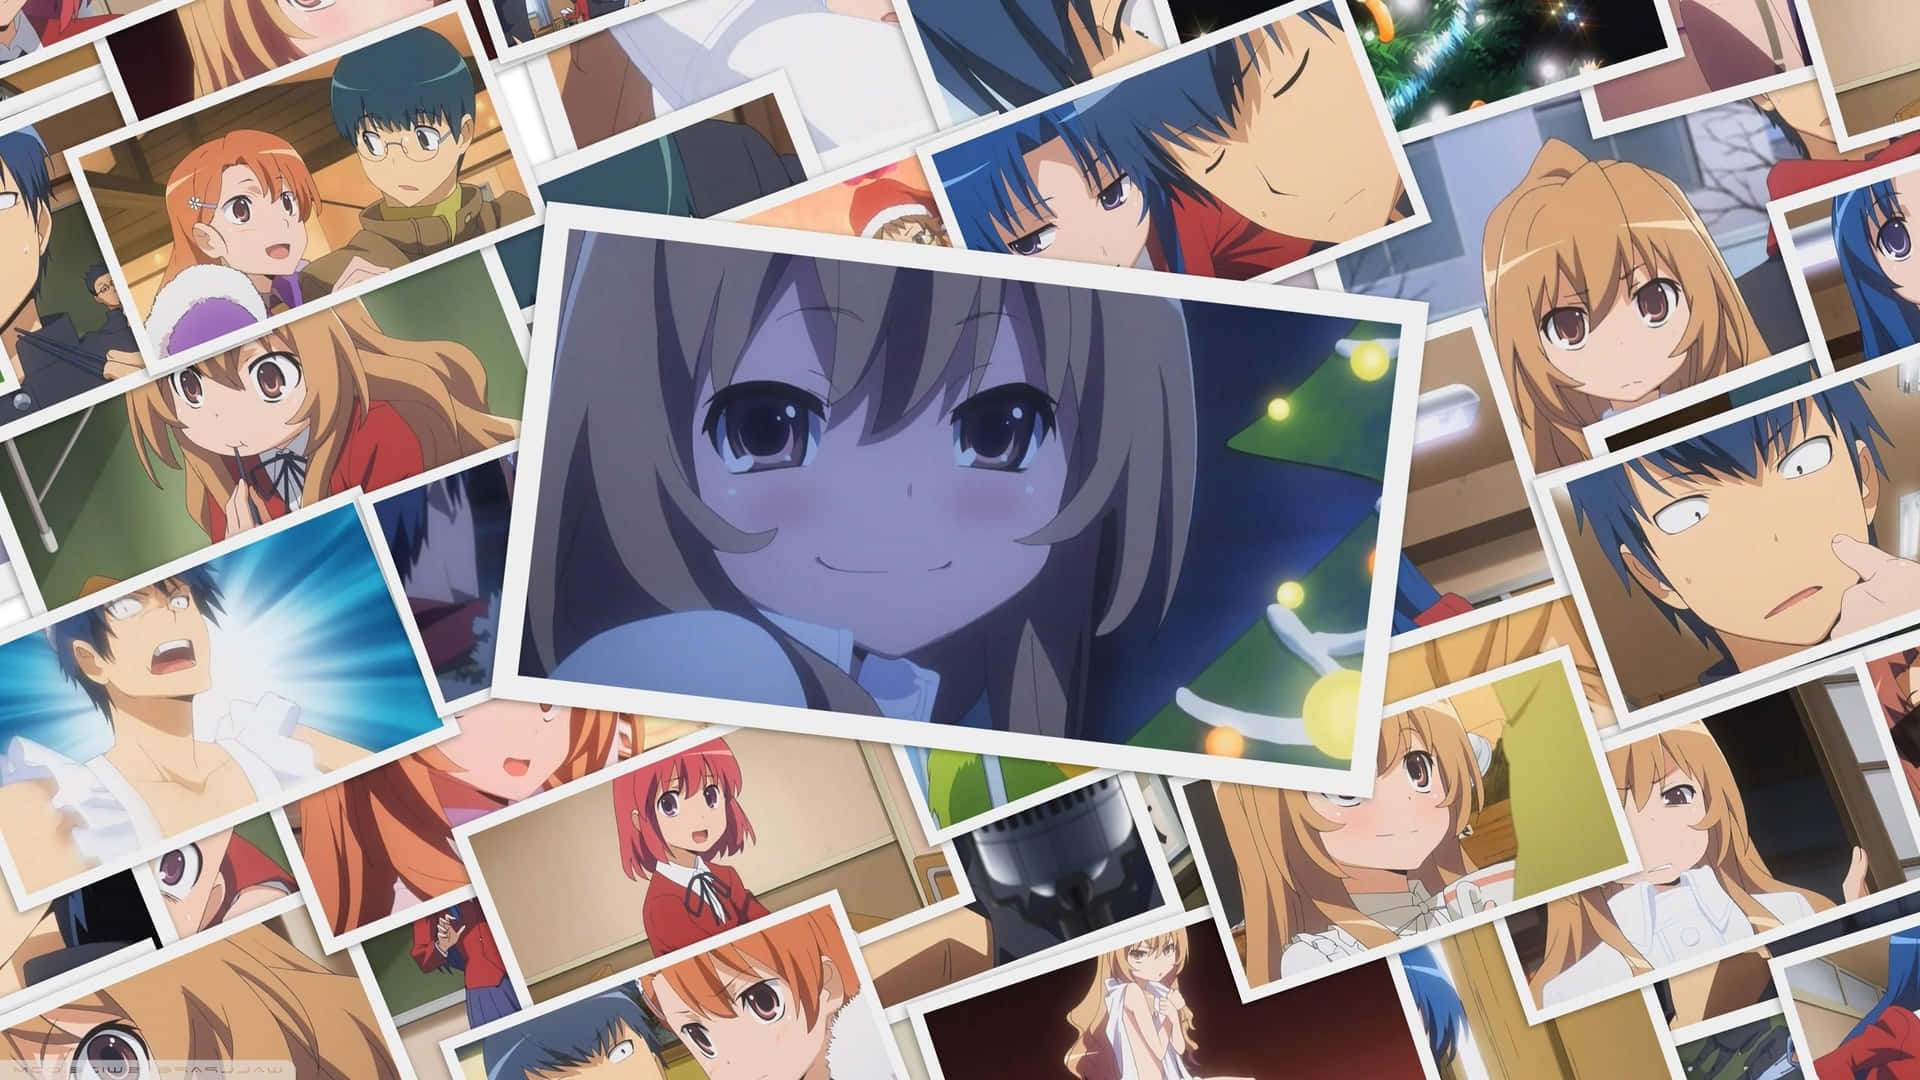 Anime Collage Wallpaper showcasing various characters Wallpaper